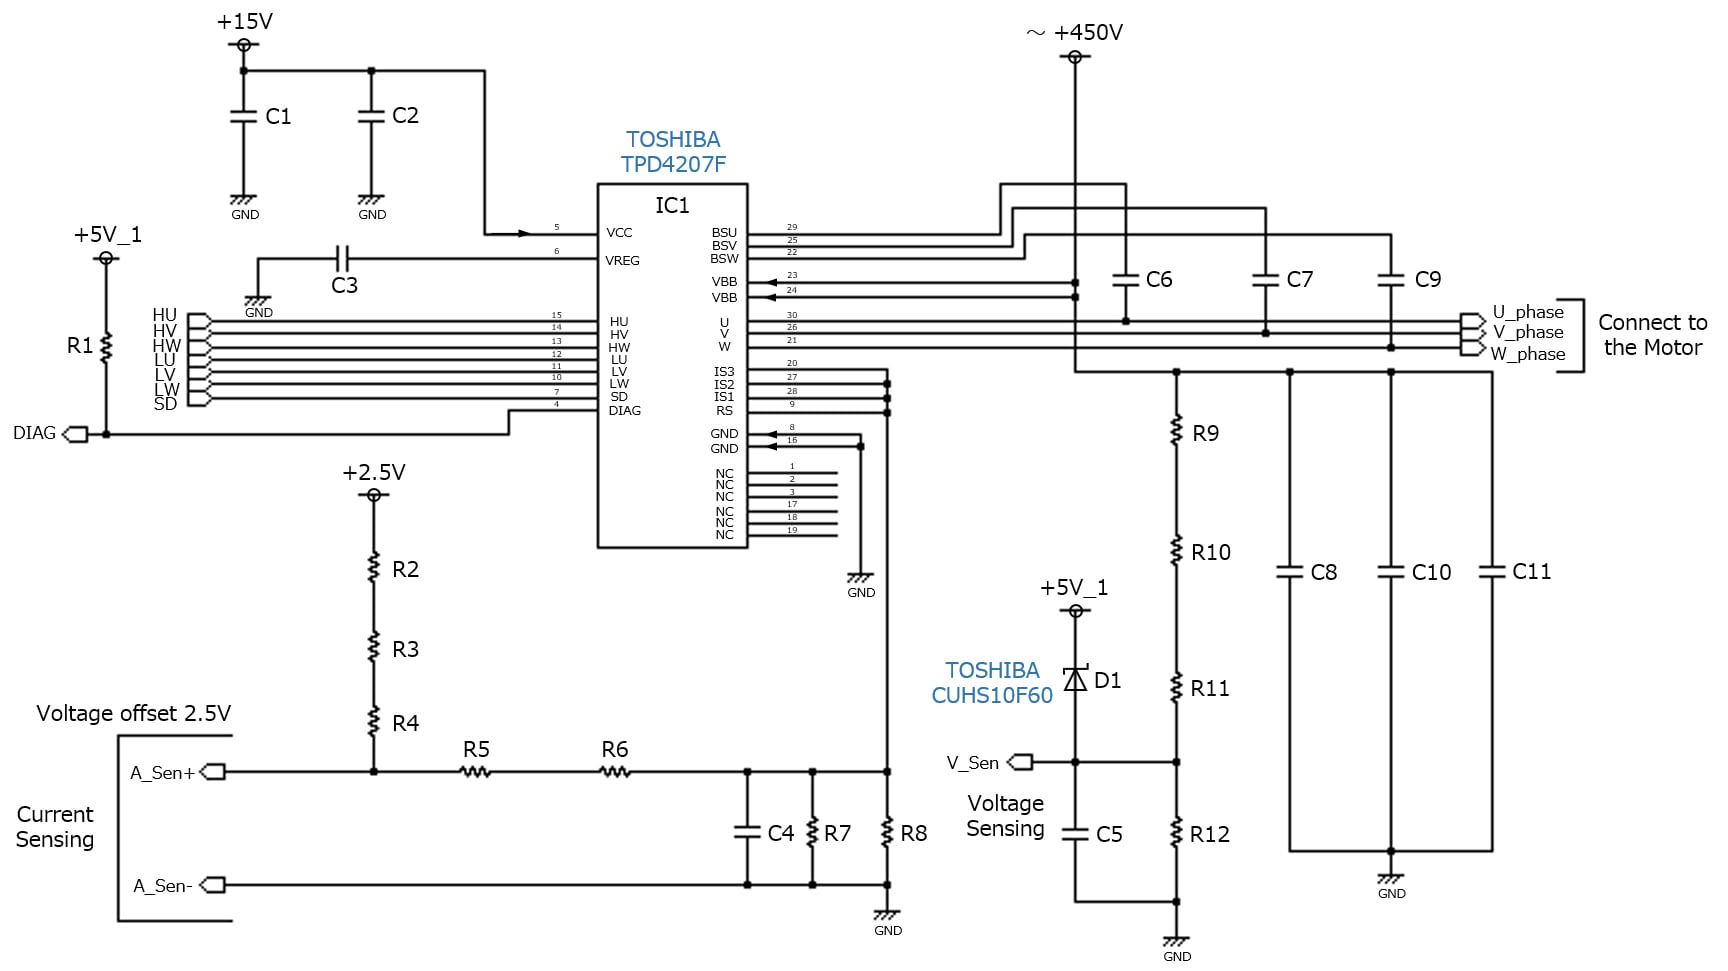 Application circuit diagram of application circuit of TPD4207F for small compressor motor drive.